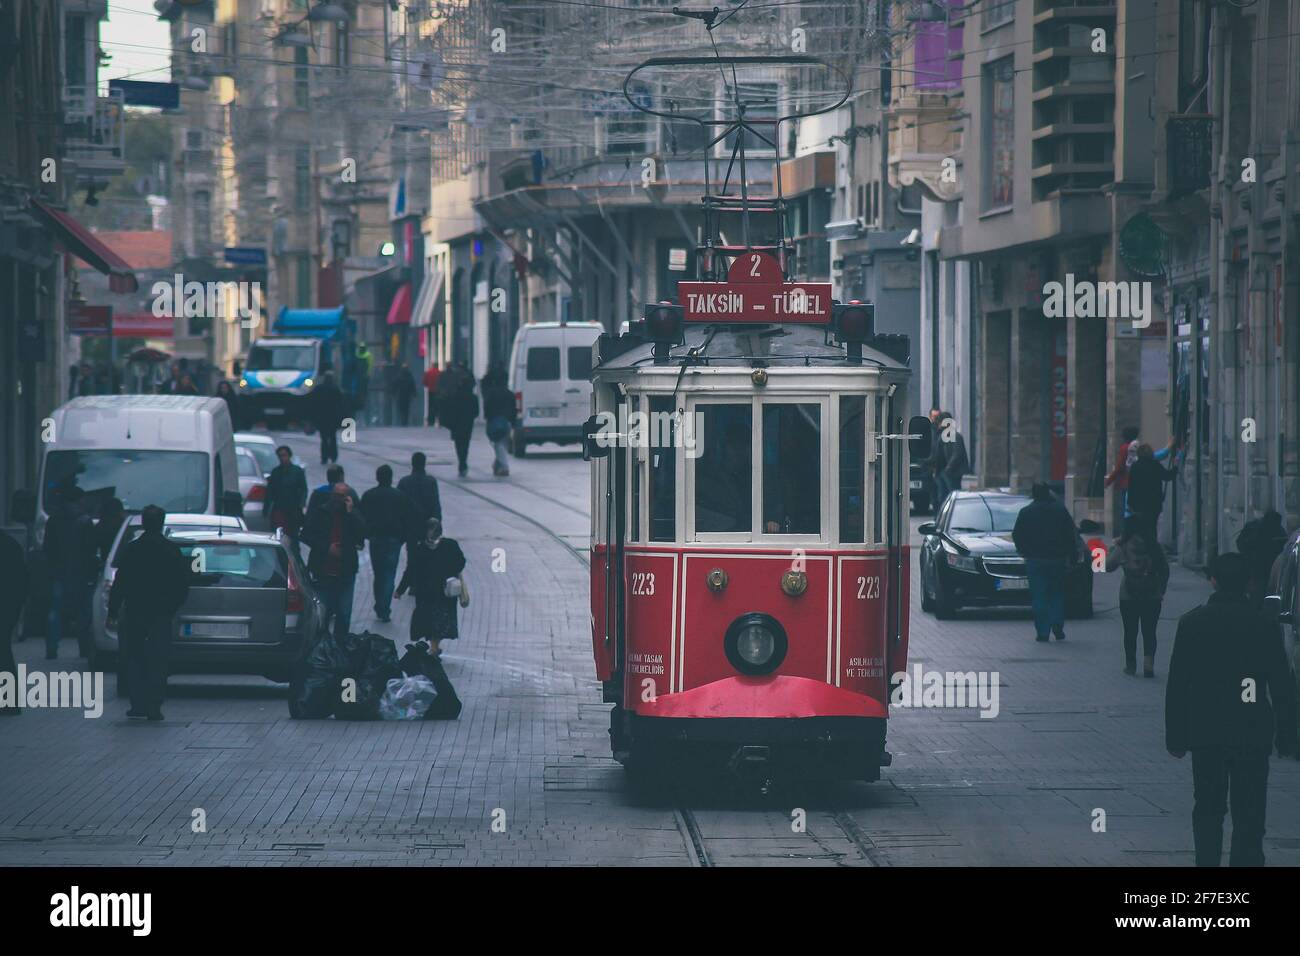 Old vintage tram in istambul, traveling in the early foggy morning between Taksim square and tunnel. Stock Photo